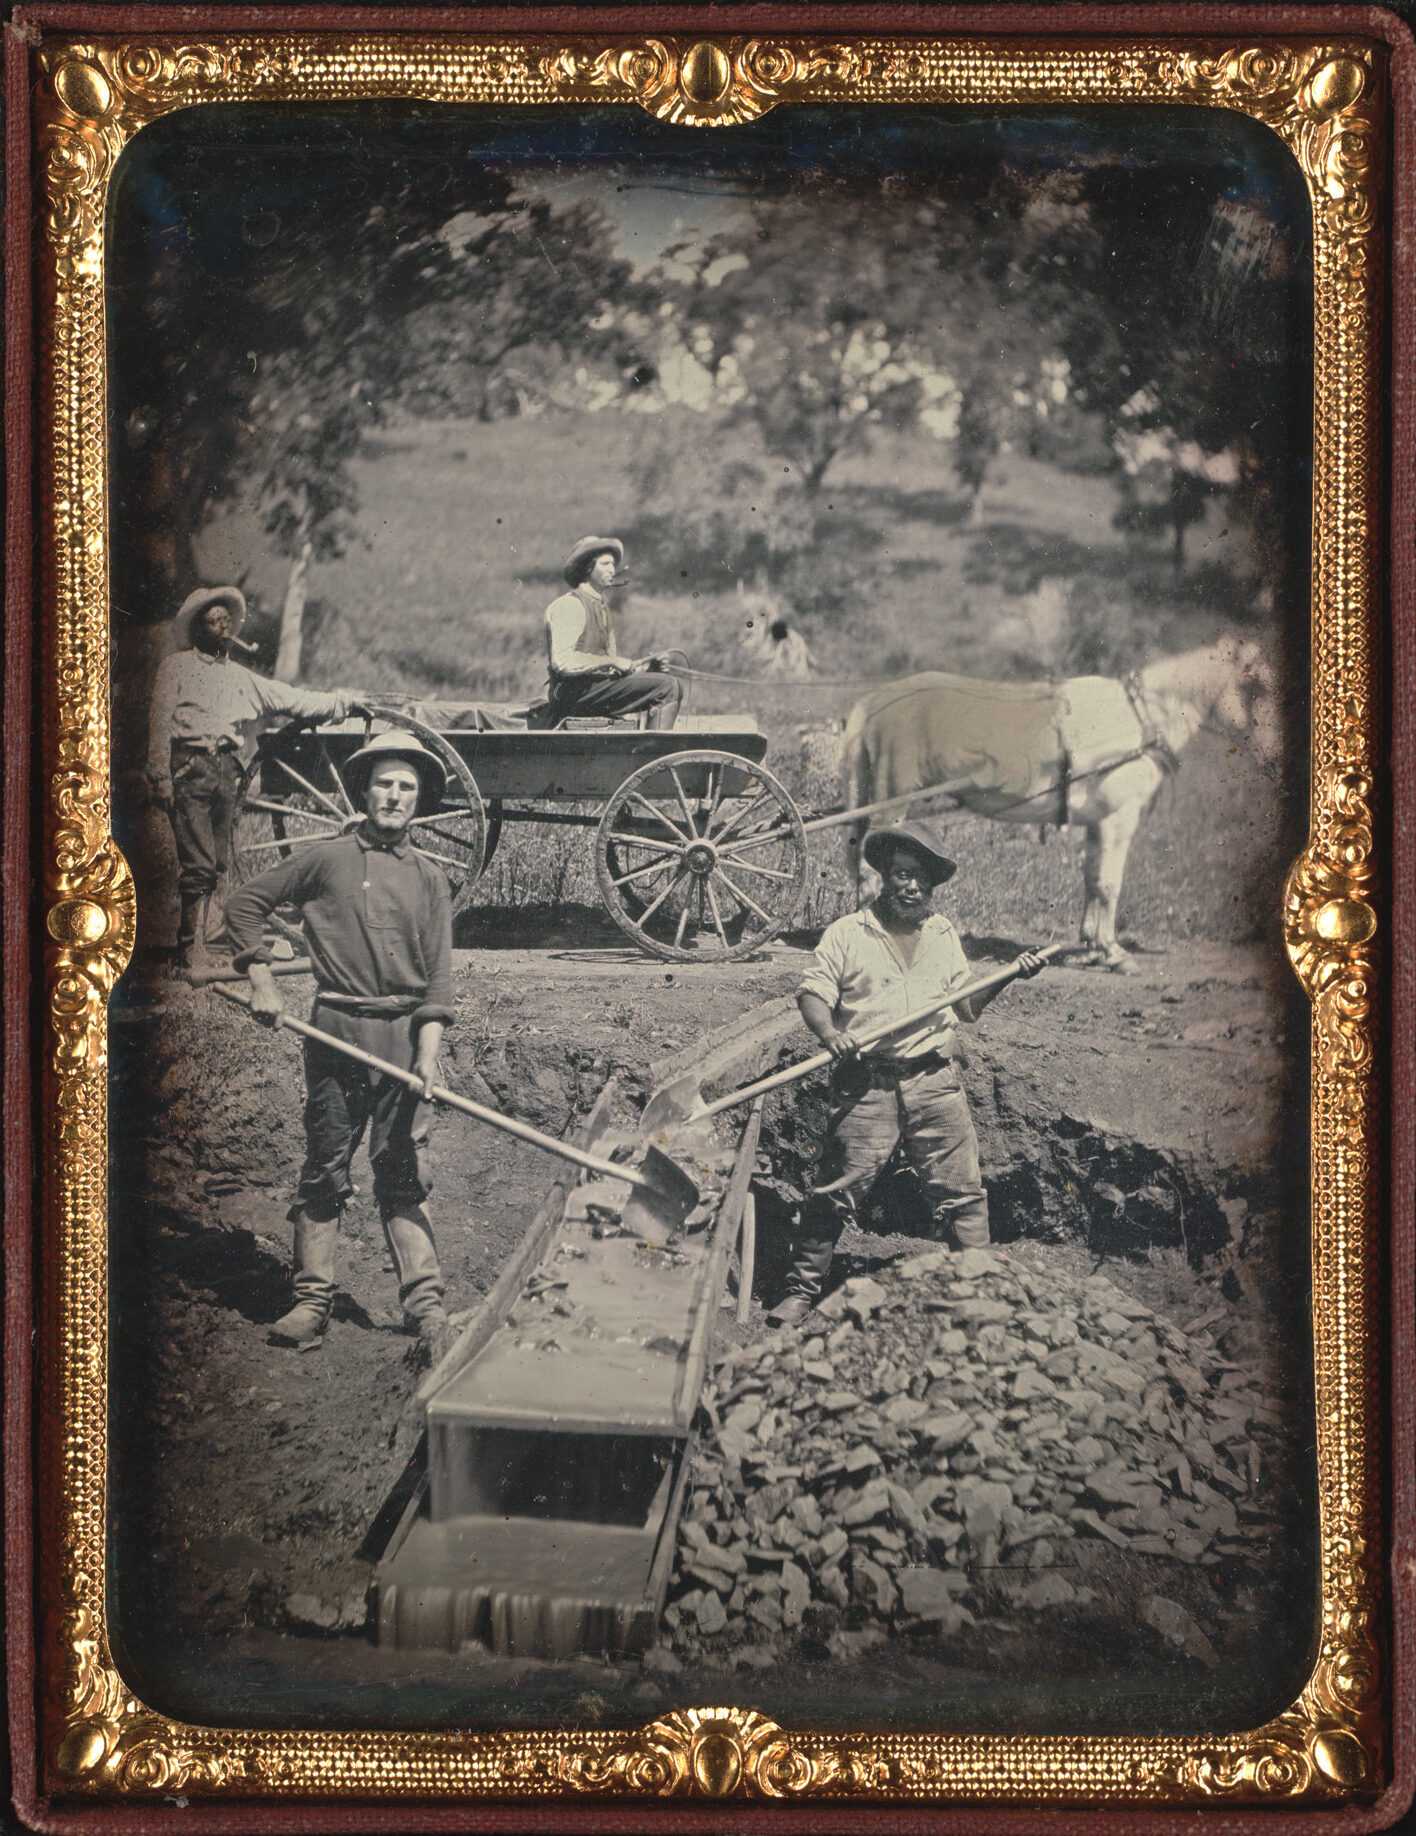 Black and white photograph of men mining gold